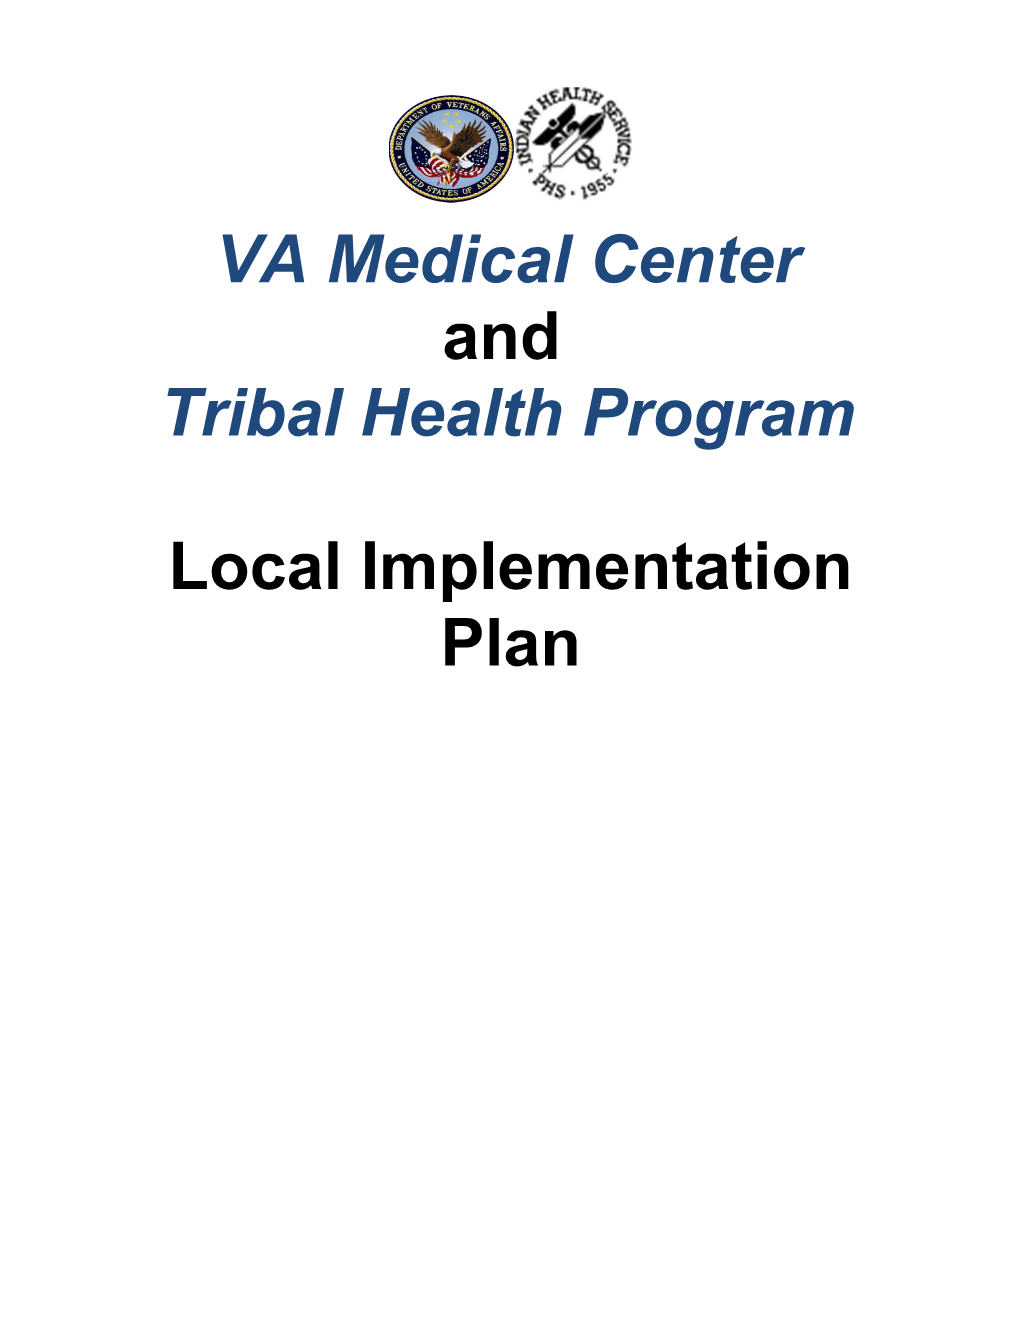 VA and THP Local Implementation Plan